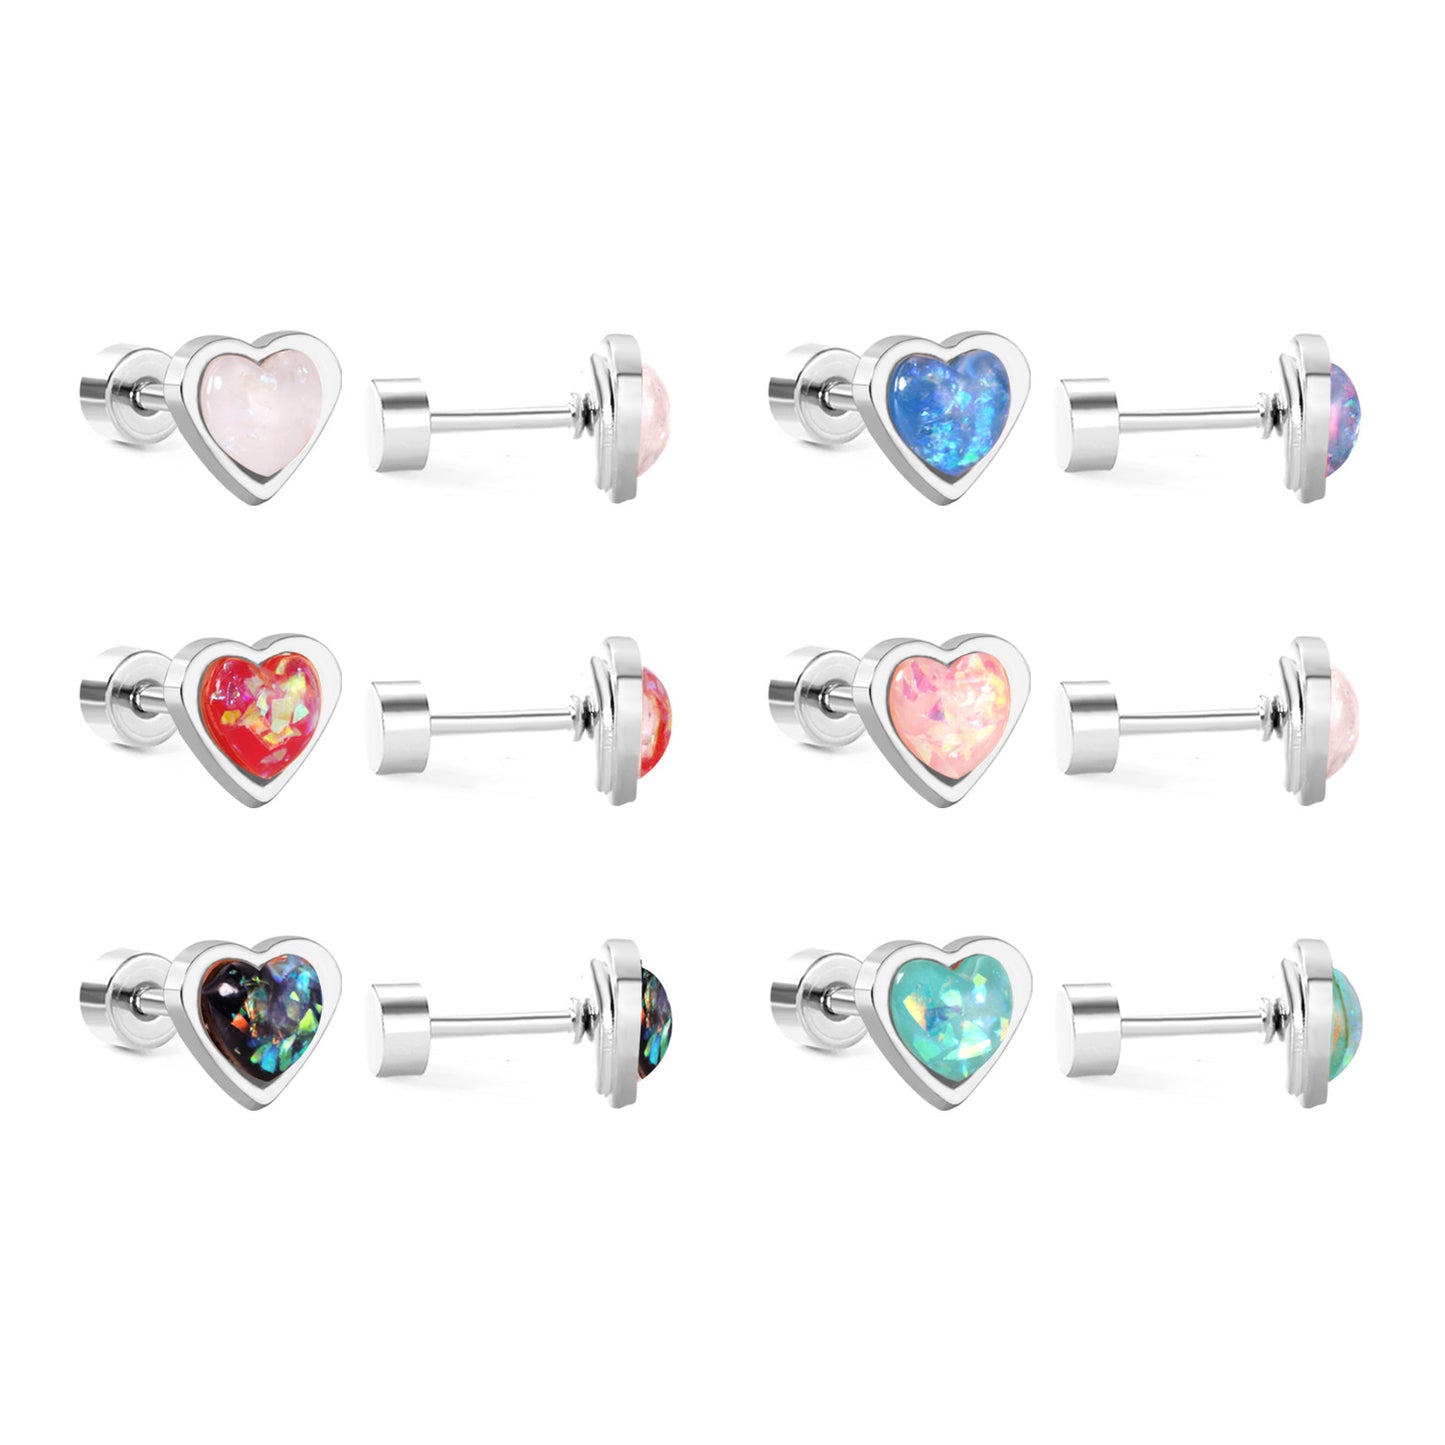 Children's, Teens' and Mothers' Earrings:  Surgical Steel, Sparkly Enamel Heart Earrings with Screw Backs - Opal Blue